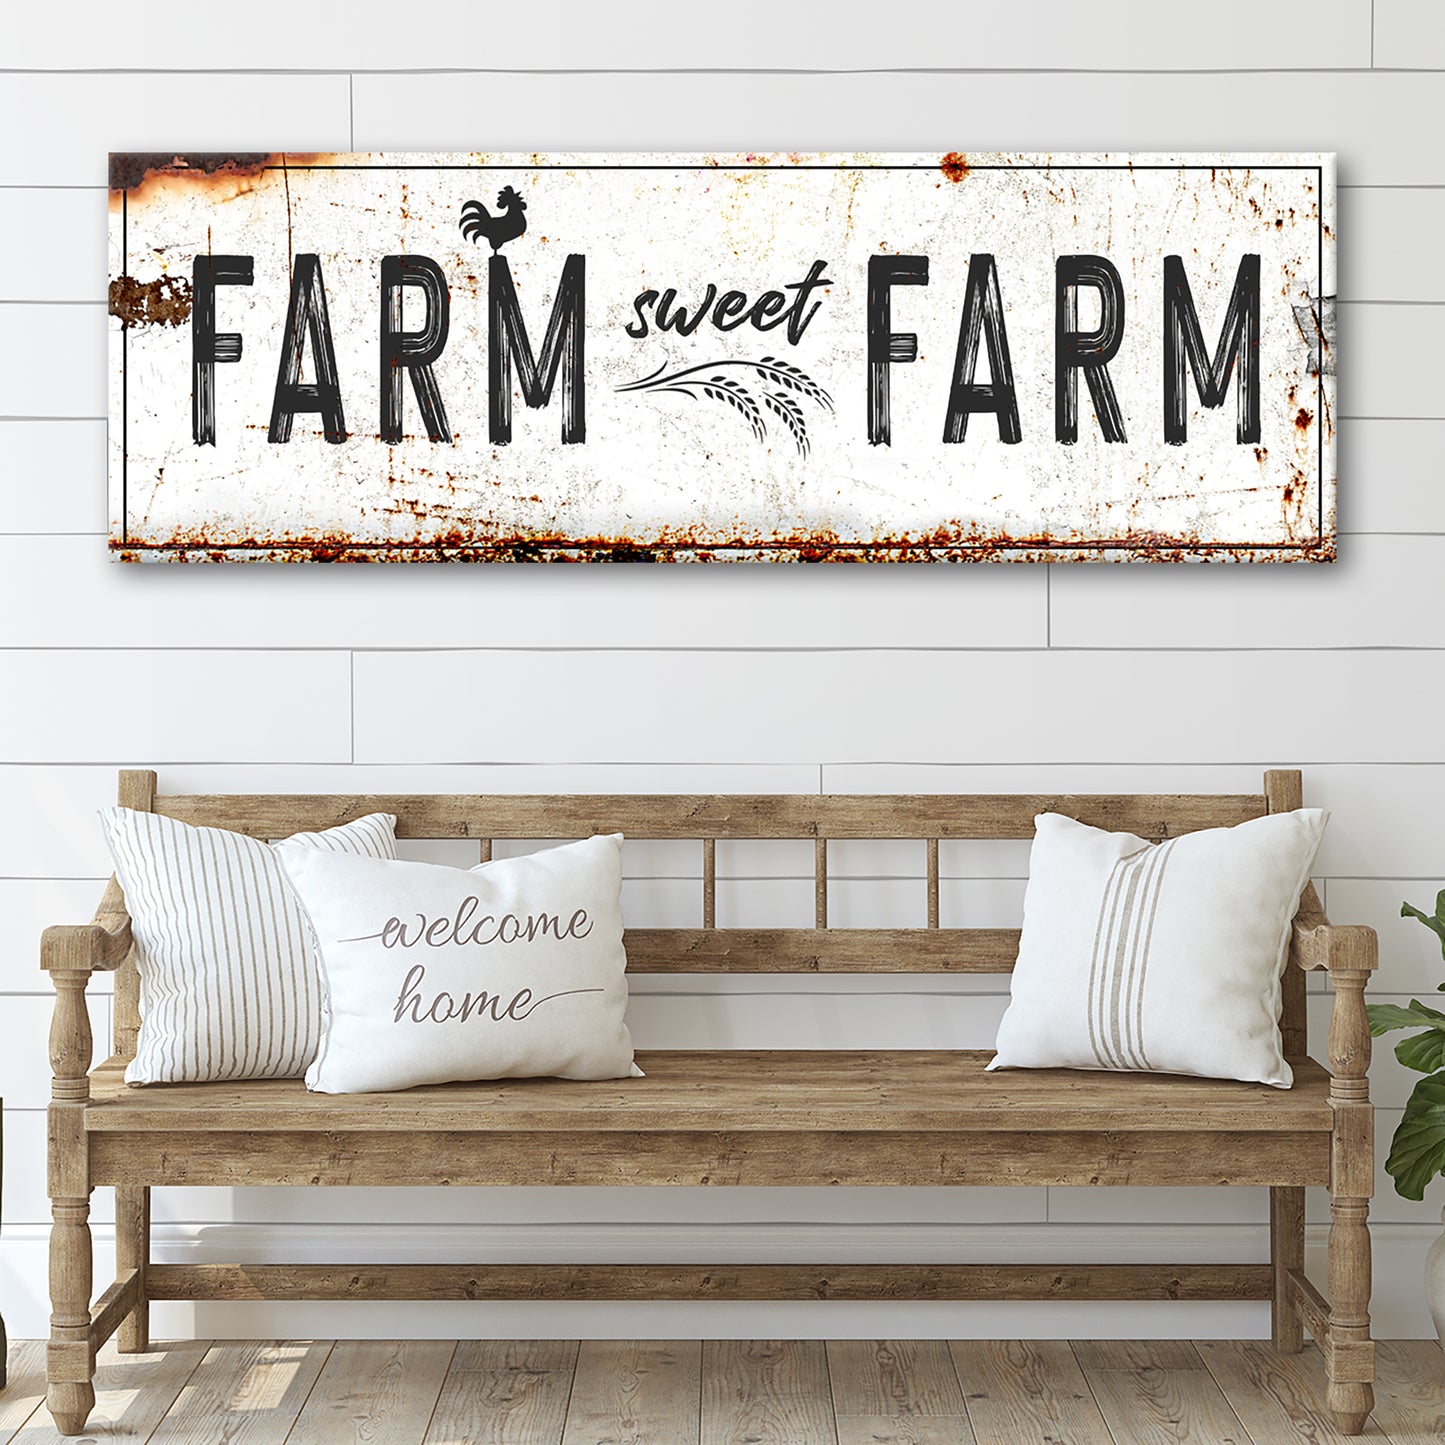 Farm Sweet Farm Sign - Image by Tailored Canvases